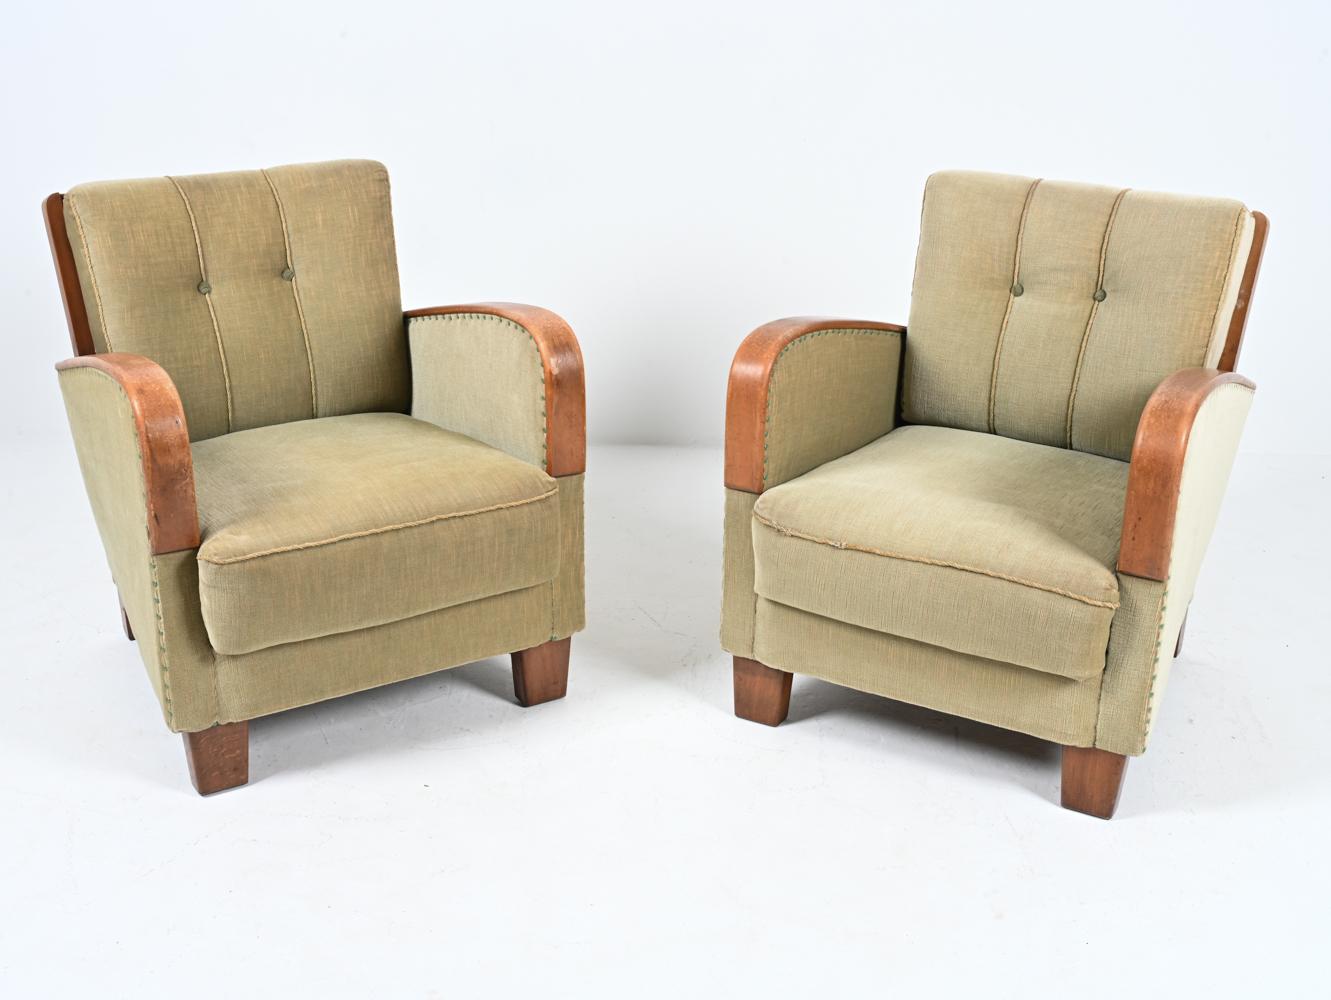 Born of the hands of a skilled carpenter, this fabulous pair of Art Deco club chairs features a chunky silhouette crafted from solid beech wood, with dramatically curved arm pads and unique partially-exposed back stiles and crests. The seats are